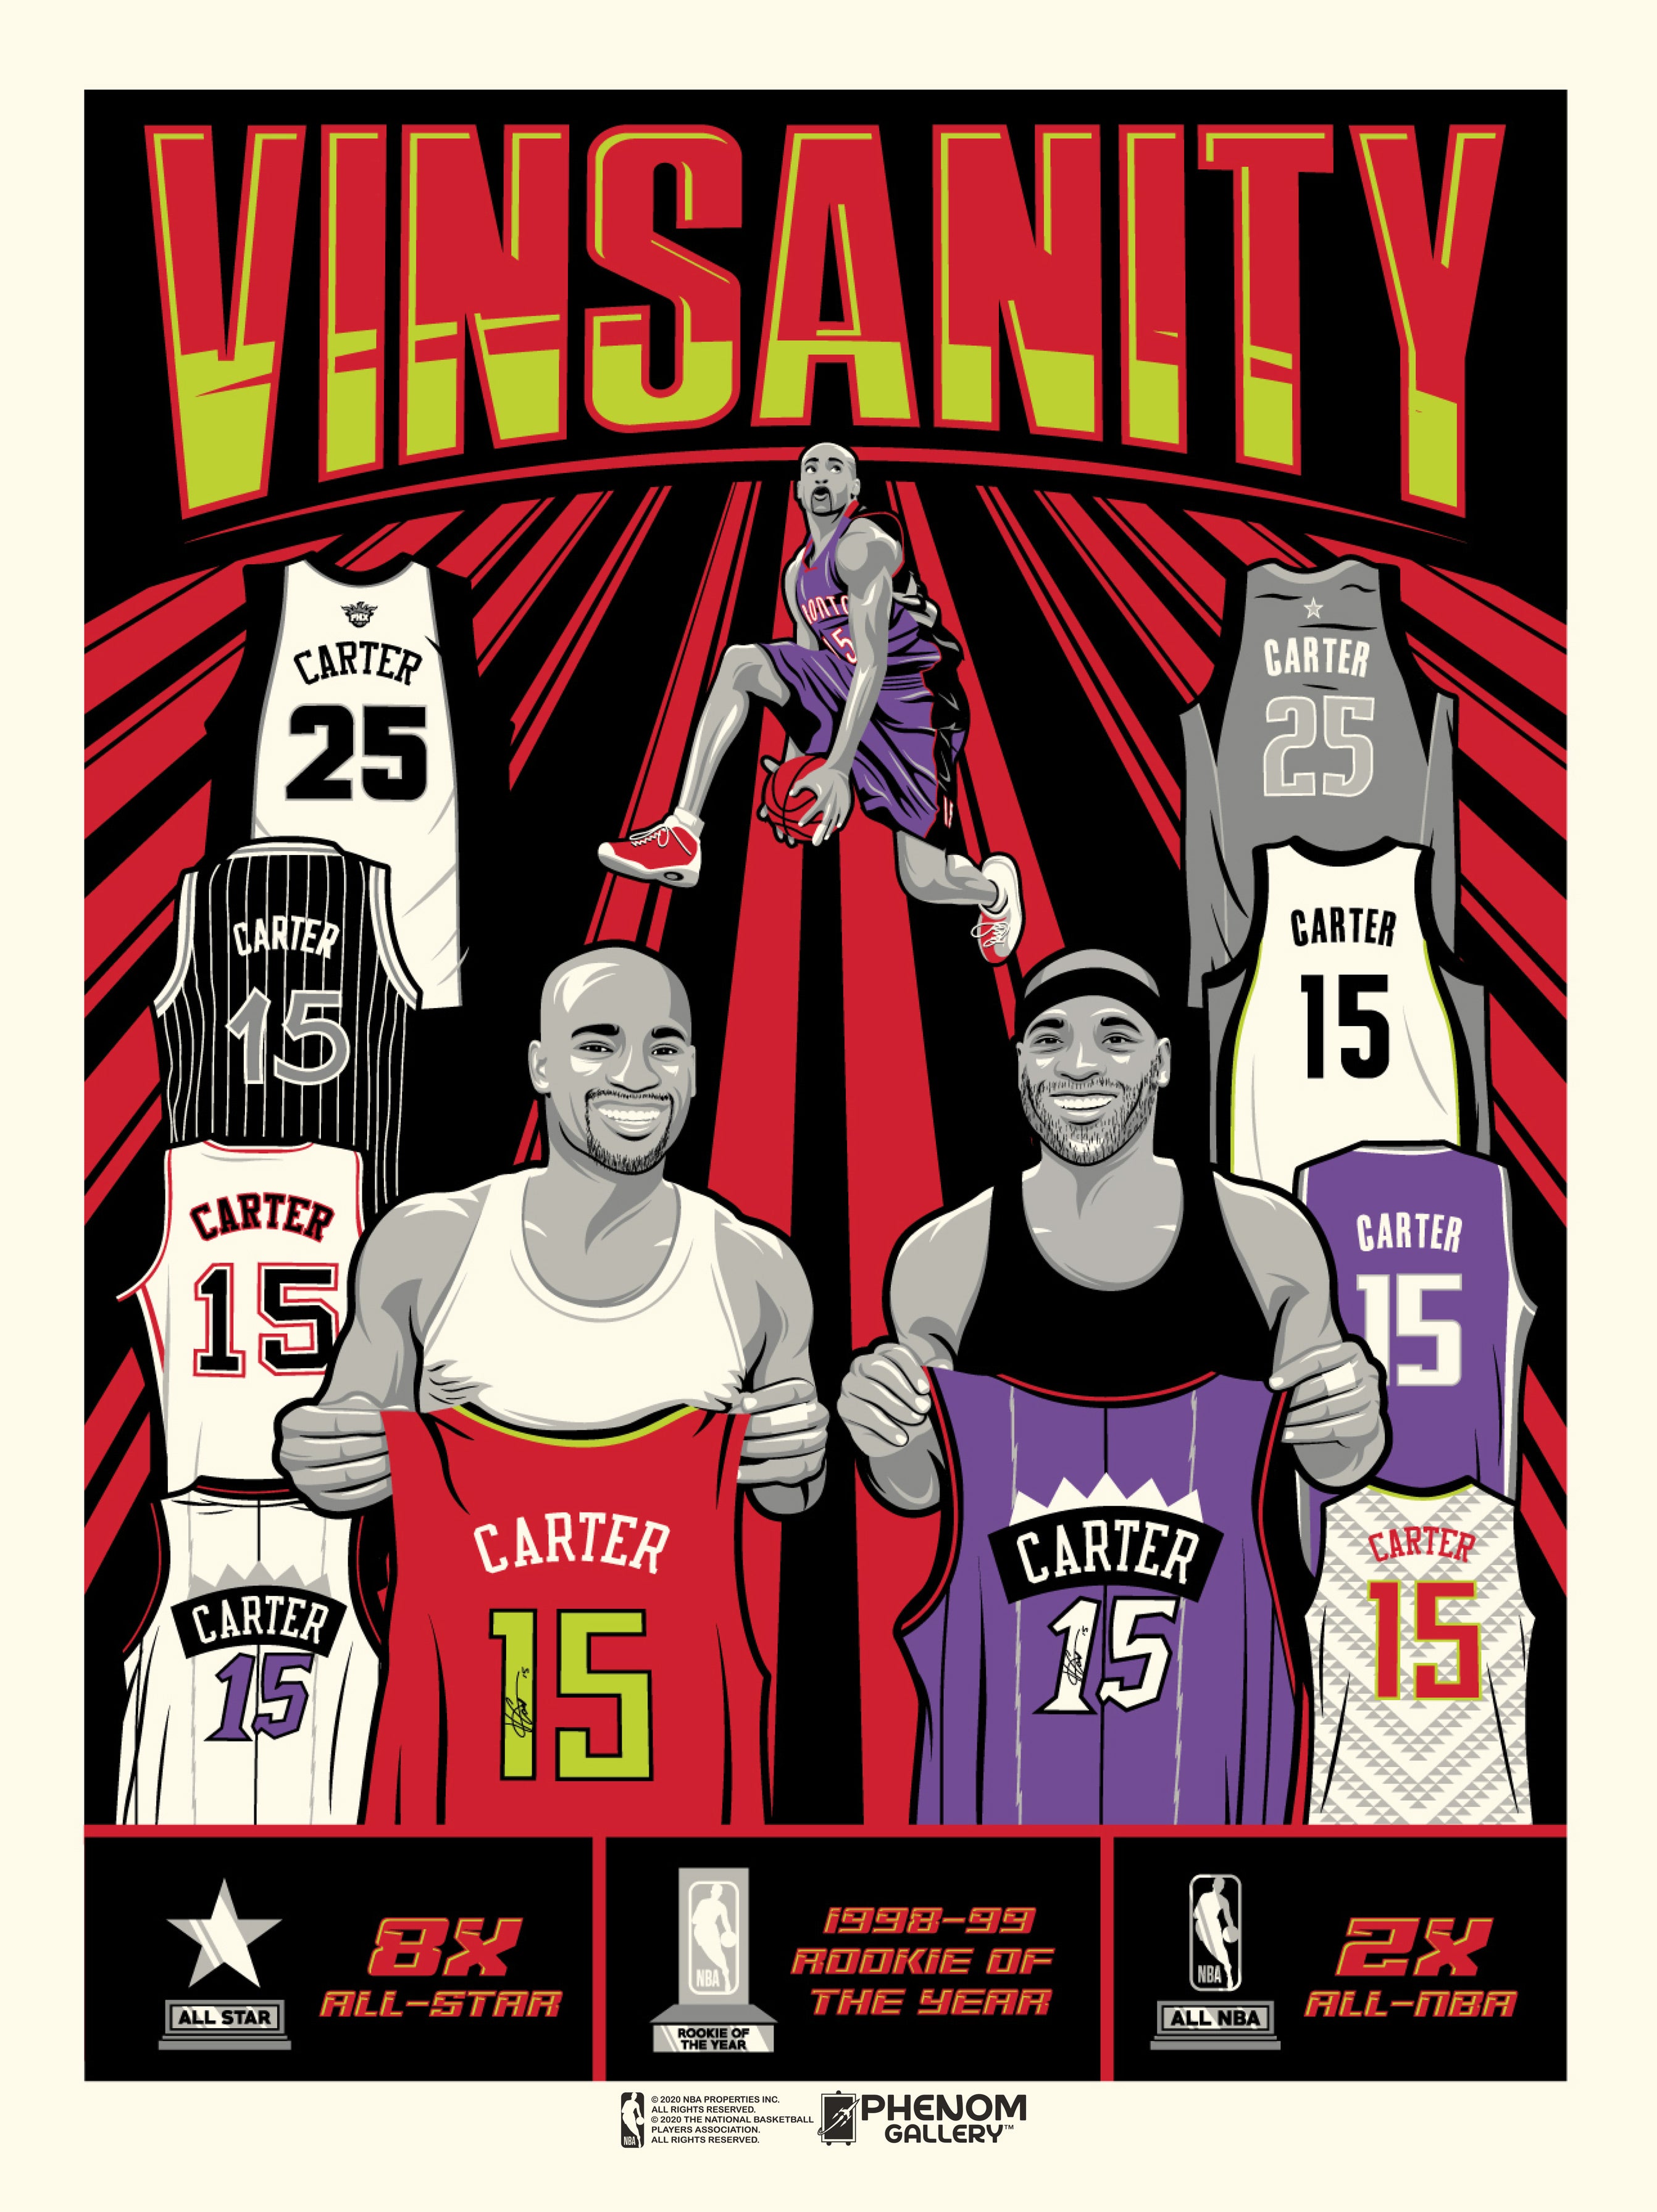 VINCE CARTER'S 21ST ANNUAL CHARITY GALA, © 2018 Visions In …